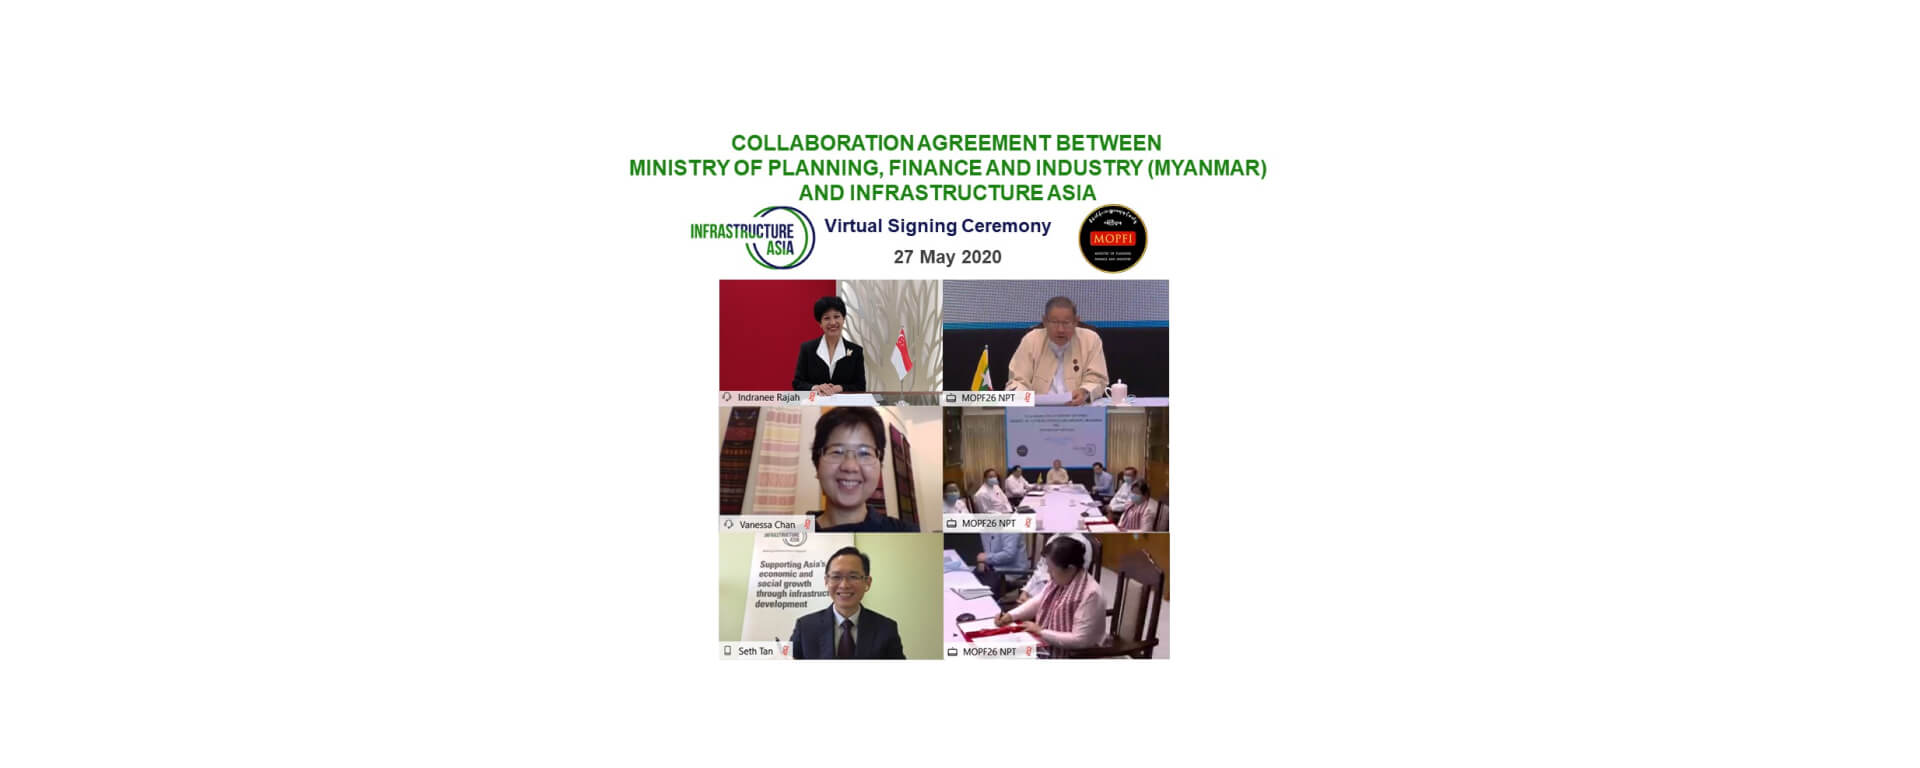 Collaboration between Infrastructure Asia and MOPFI for PPP in Myanmar- Banner